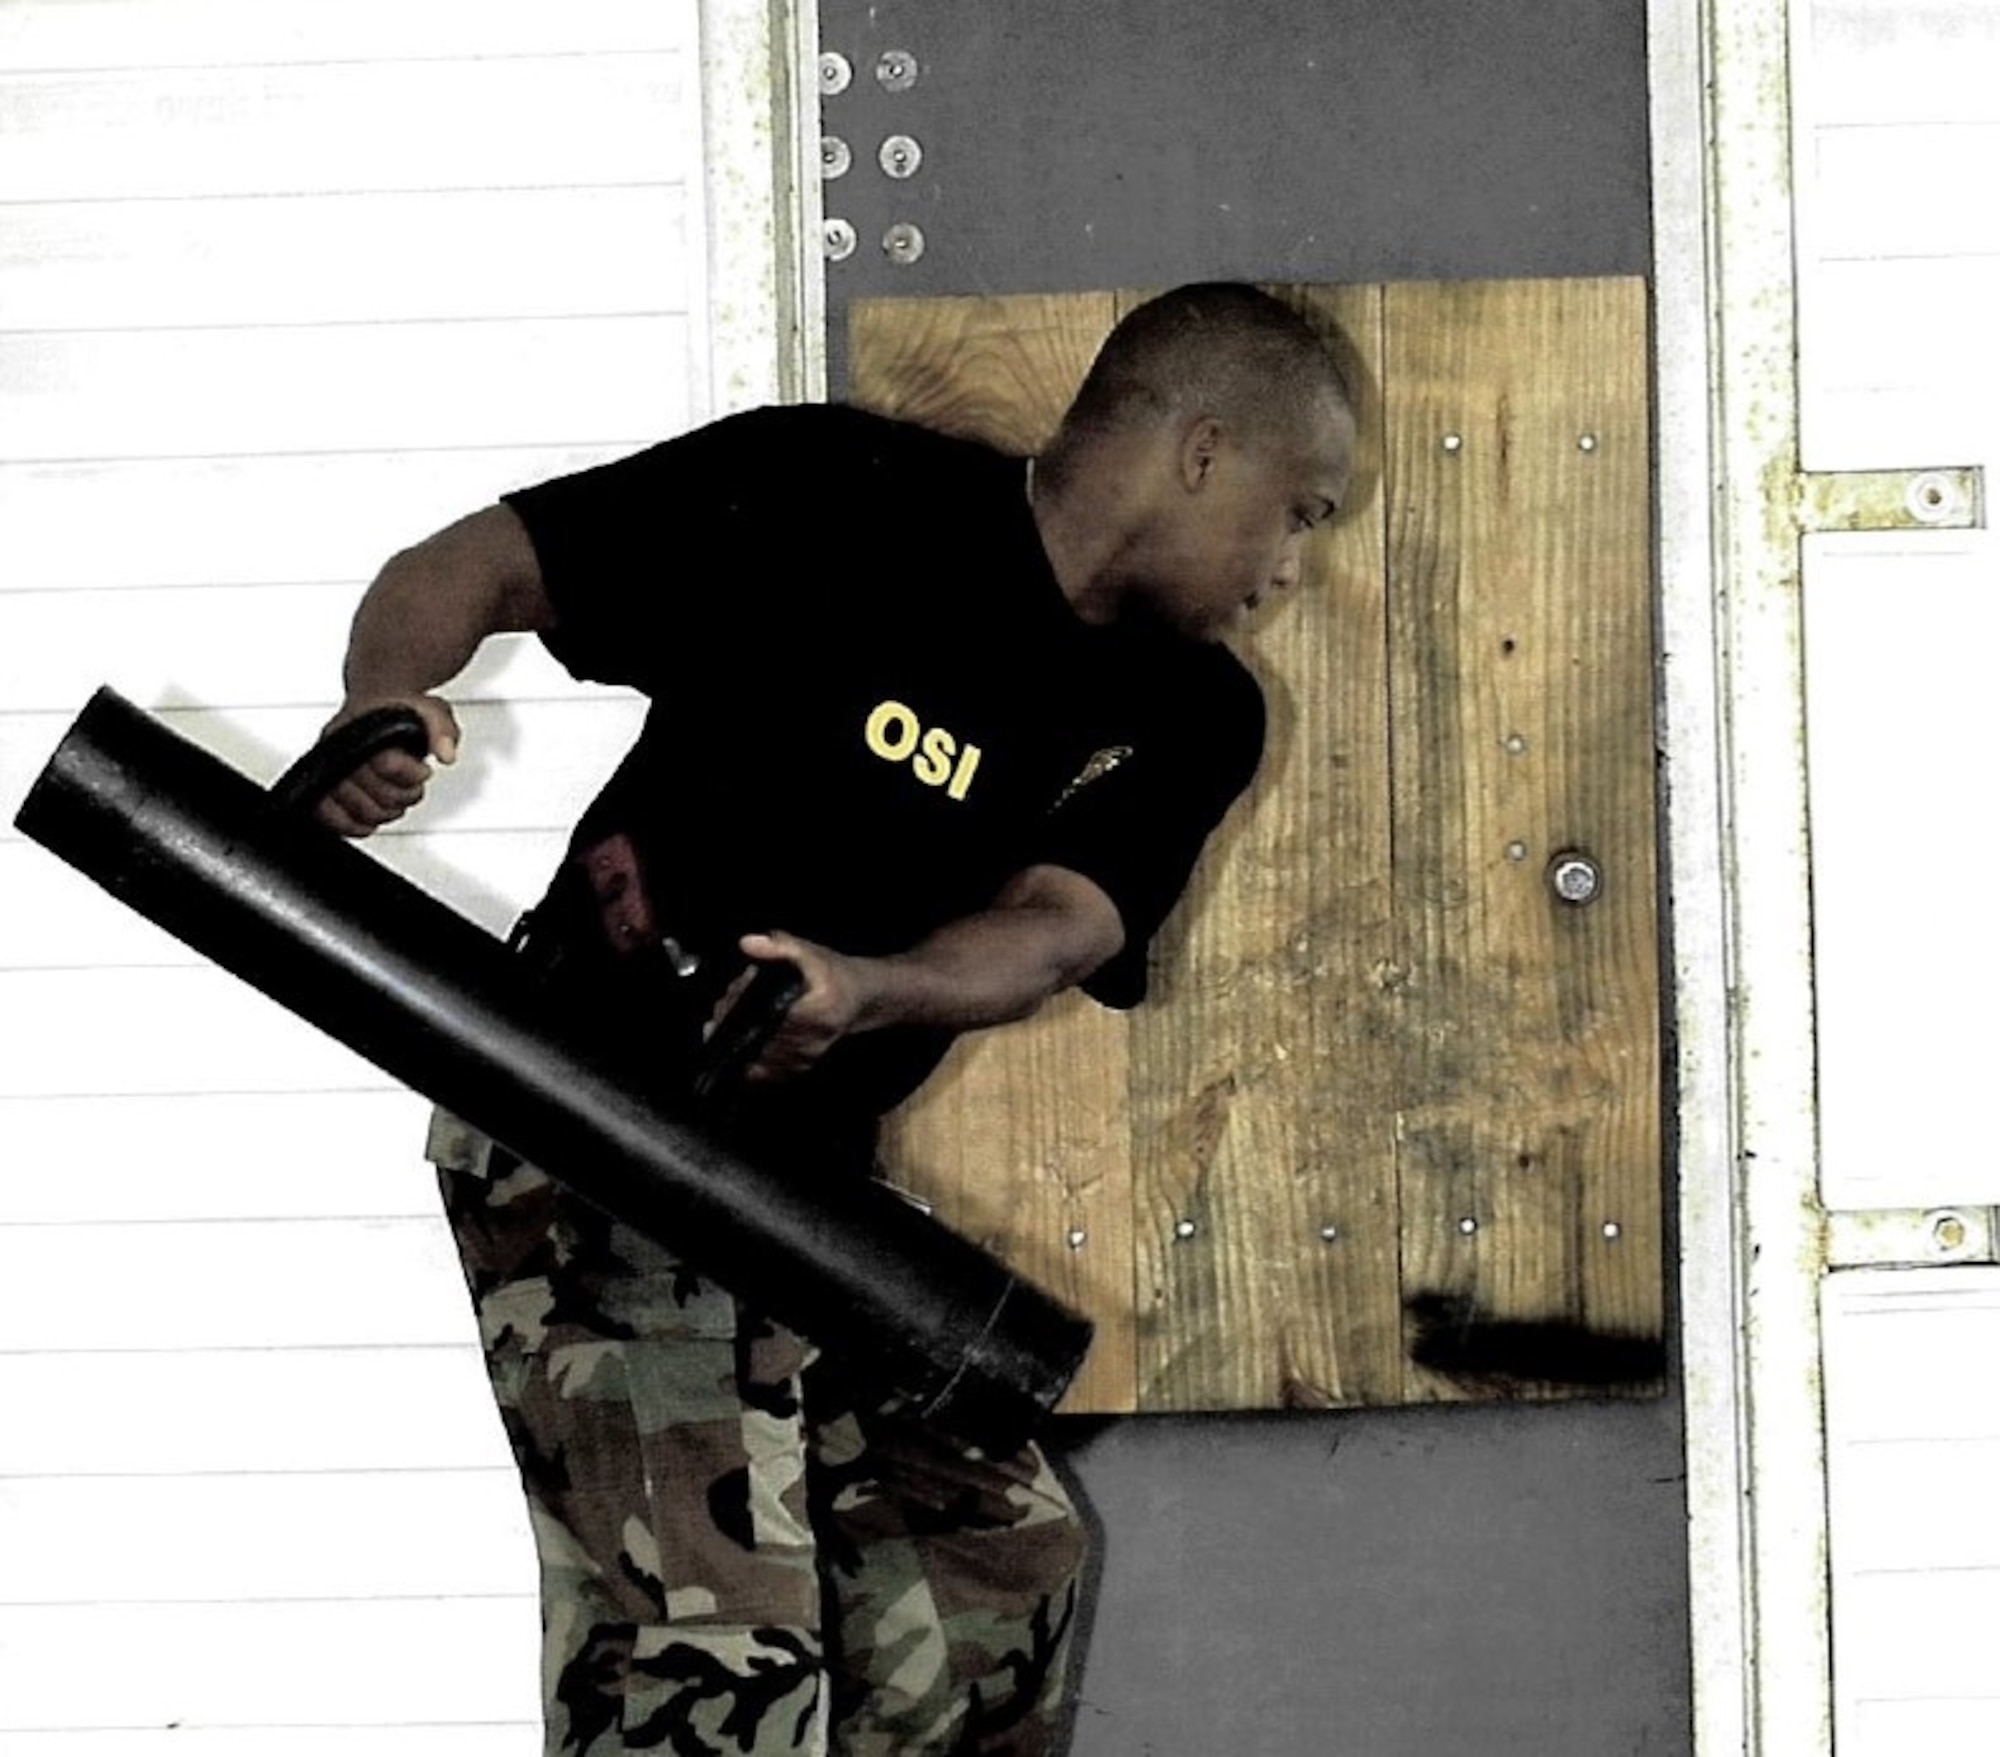 An Air Force Special Investigations Academy Class 301 member conducts “Dynamic Entry” training at the Federal Law Enforcement Training Center, Glynco, Ga.(U.S. Air Force photo)